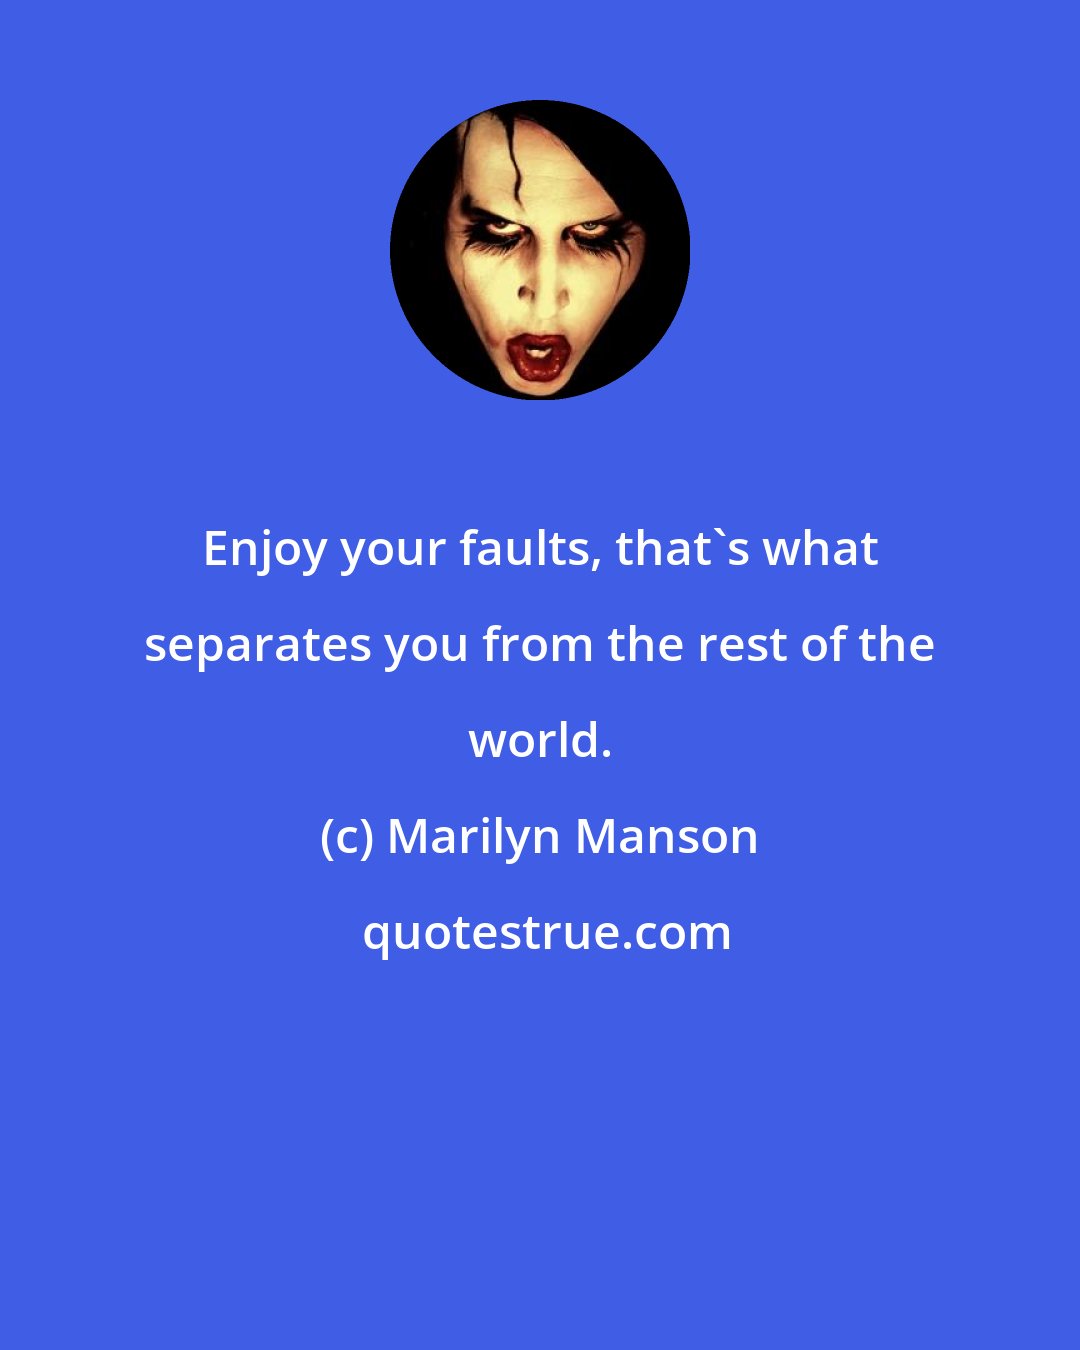 Marilyn Manson: Enjoy your faults, that's what separates you from the rest of the world.